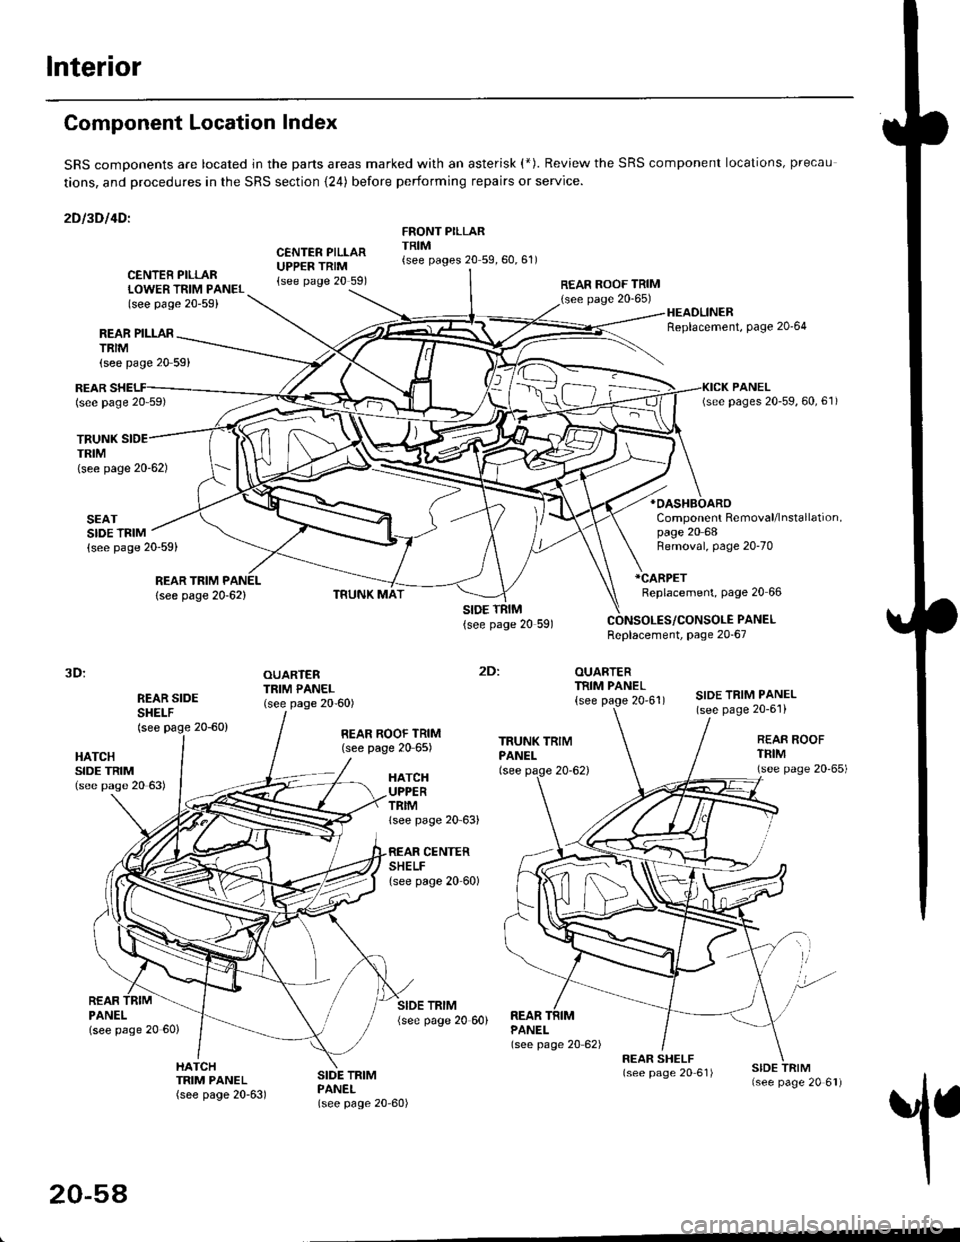 HONDA CIVIC 2000 6.G Workshop Manual Interior
Component Location Index
SRS comDonents are located jn the parts areas marked with an asterisk (*). Review the SRS component locations, precau
tions, and procedures in the SRS section {24) be